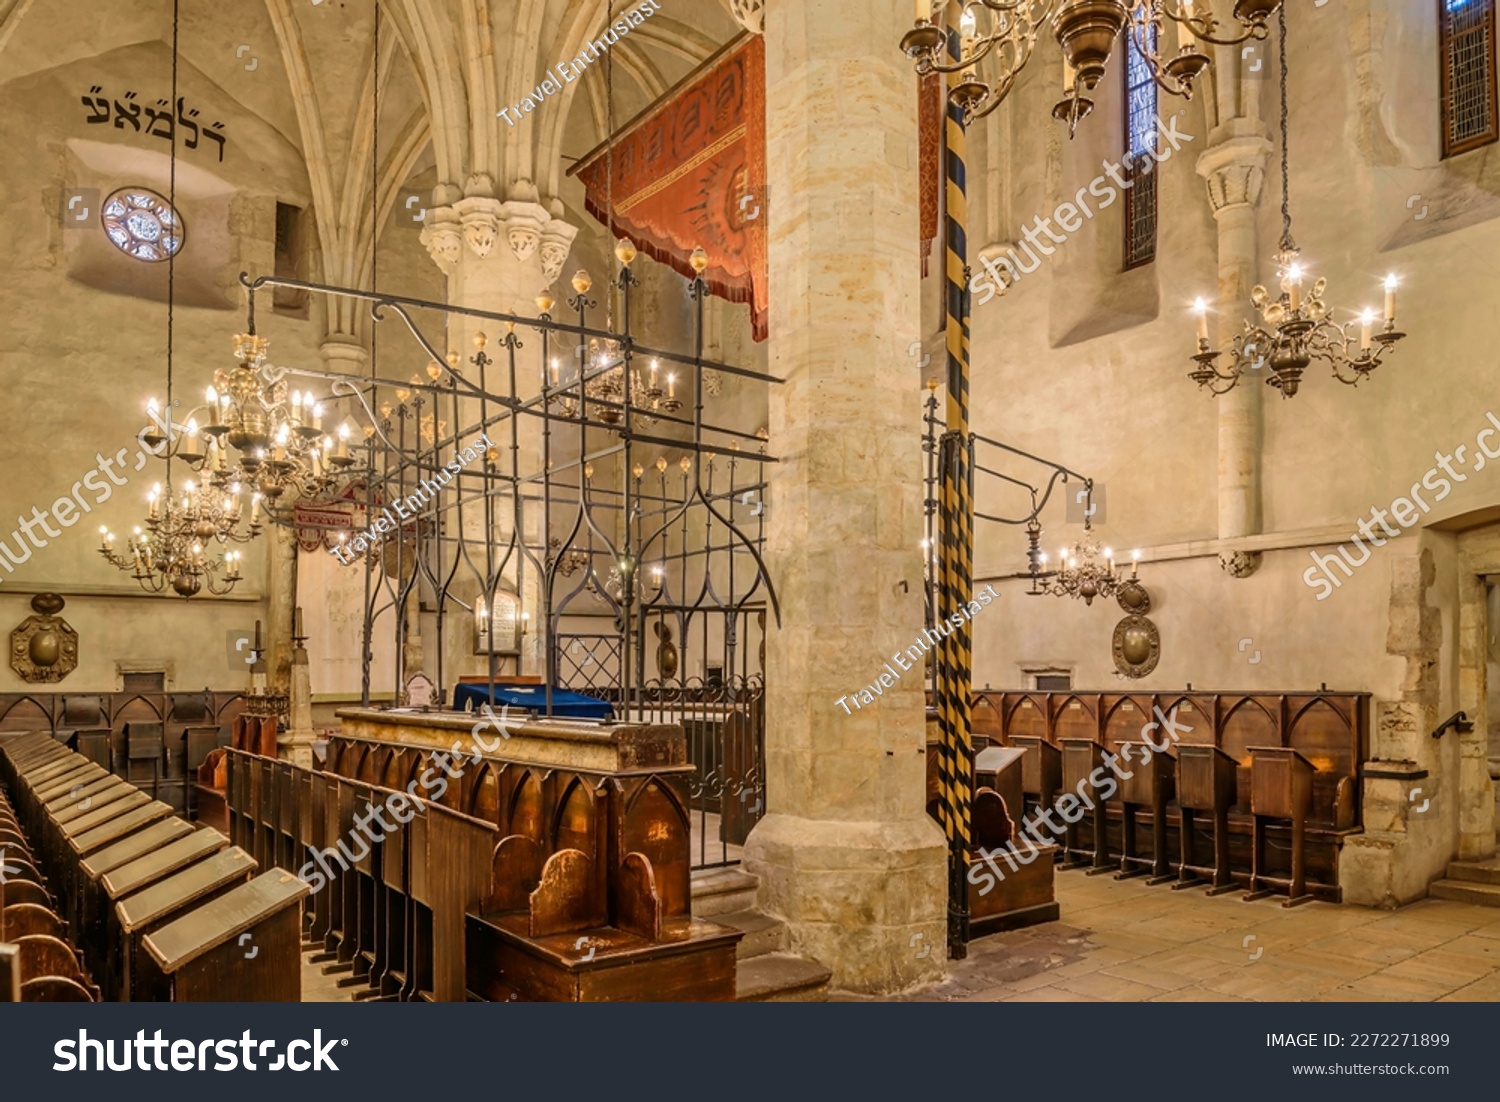 Interior of the Old-New Synagogue in the jewish district of Prague, Czech Republic. #2272271899